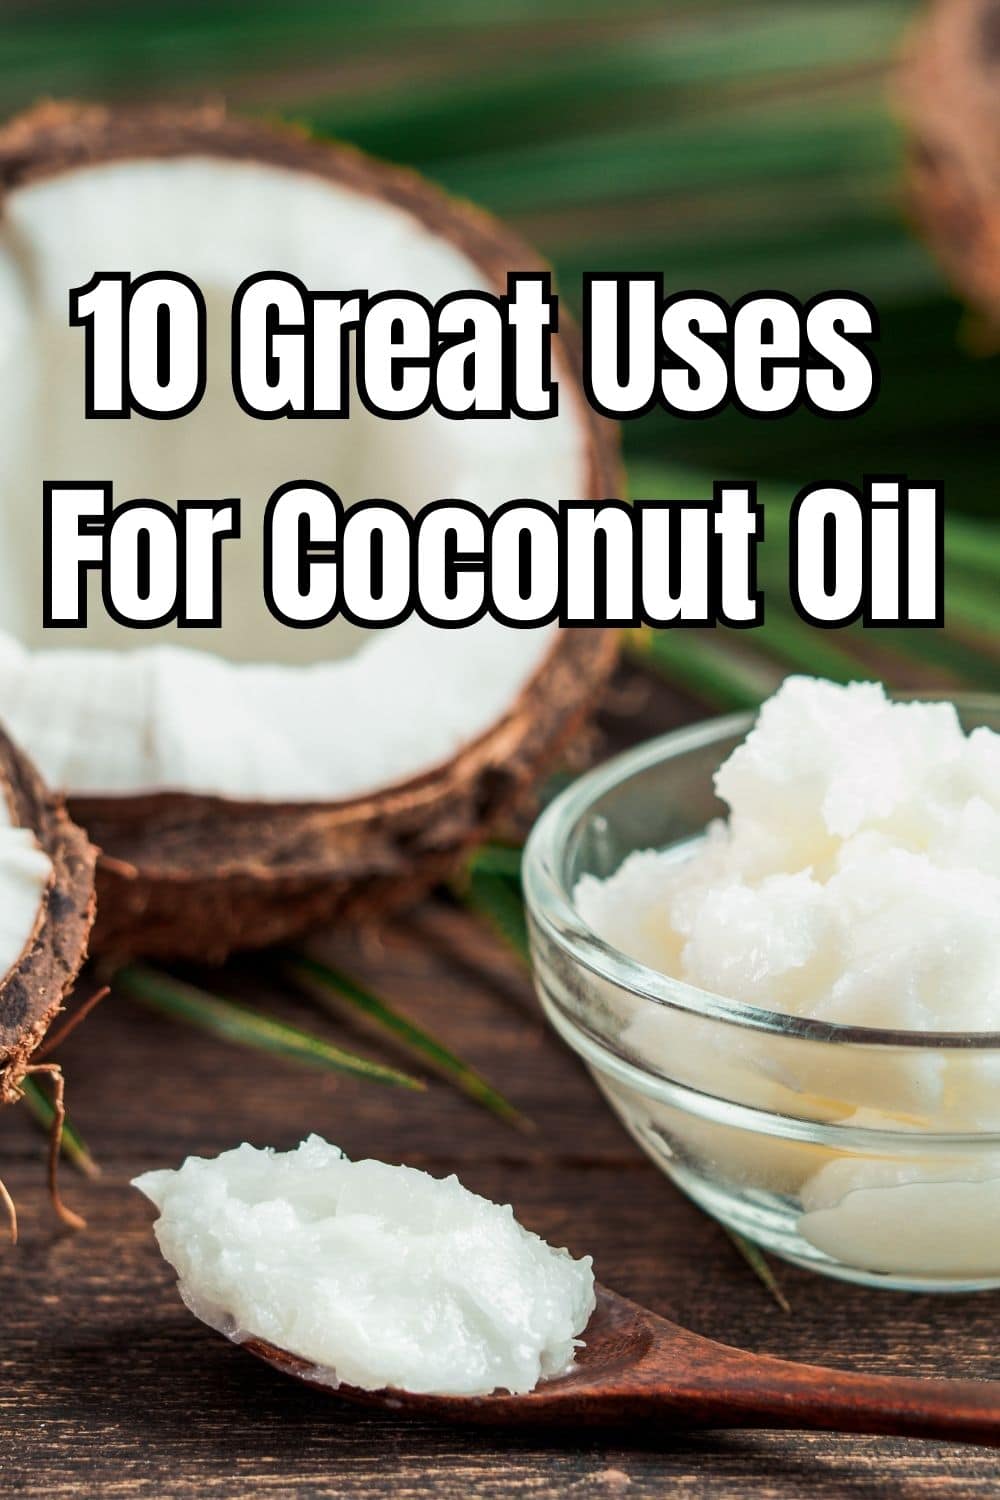 10 Great Uses For Coconut Oil